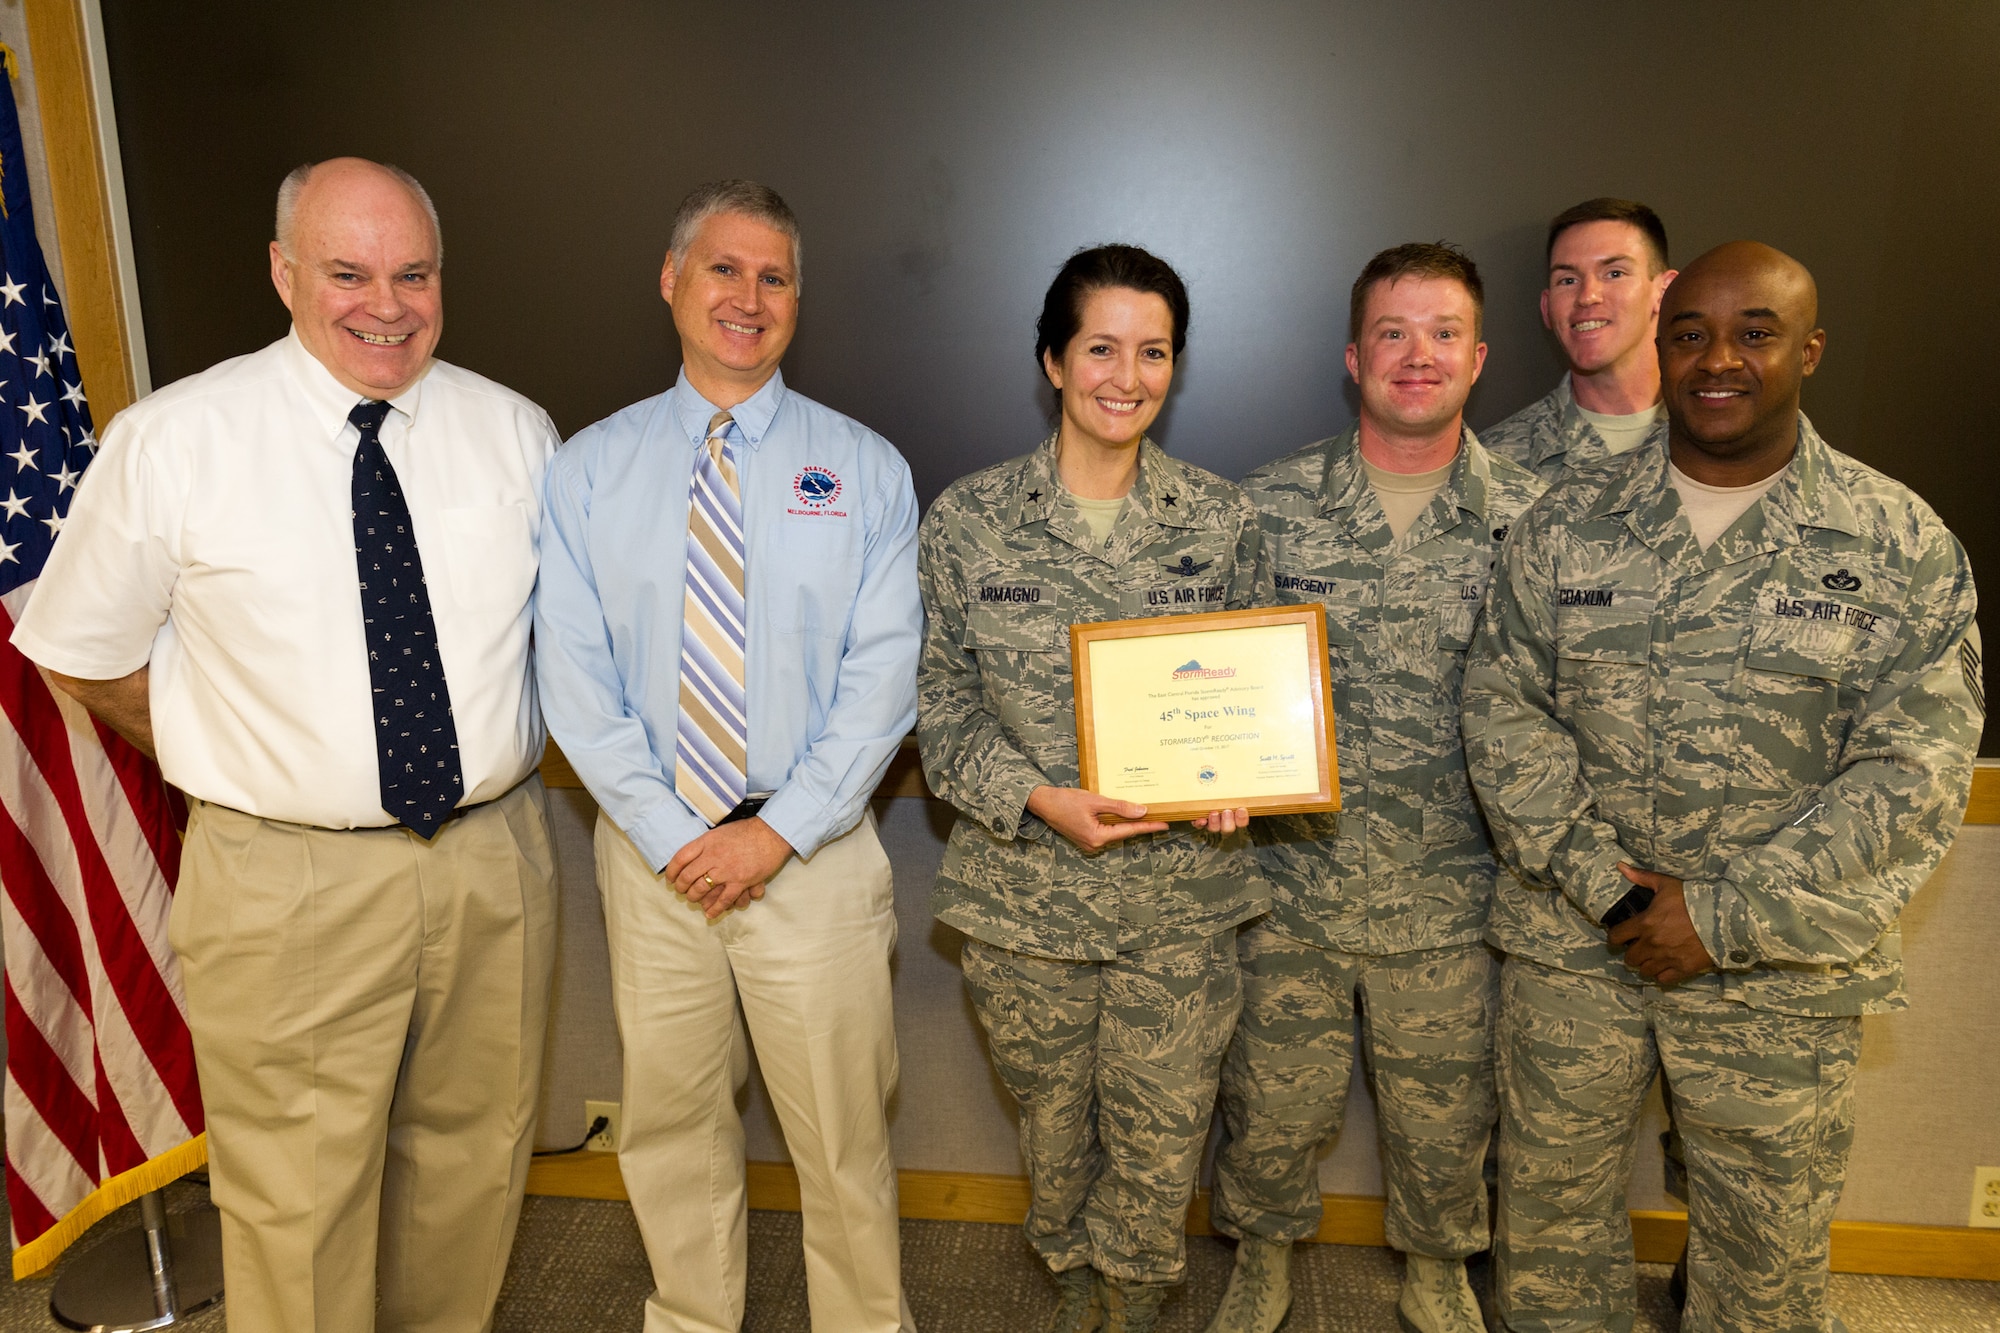 Brig. Gen. Nina Armagno, 45th Space Wing commander, and members of the 45th Civil Engineer Squadron, accept a StormReady certification certificate from members of the National Weather Service, March 11, 2015, at Patrick Air Force Base, Fla. National Weather Service officials recognized Patrick AFB as a StormReady site. The StormReady program helps community leaders and residents better prepare for hazardous weather and flooding. StormReady sites have made a strong commitment to implement the infrastructure and systems needed to save lives and protect property when severe weather strikes. (U.S. Air Force photo/Cory Long) (Released)